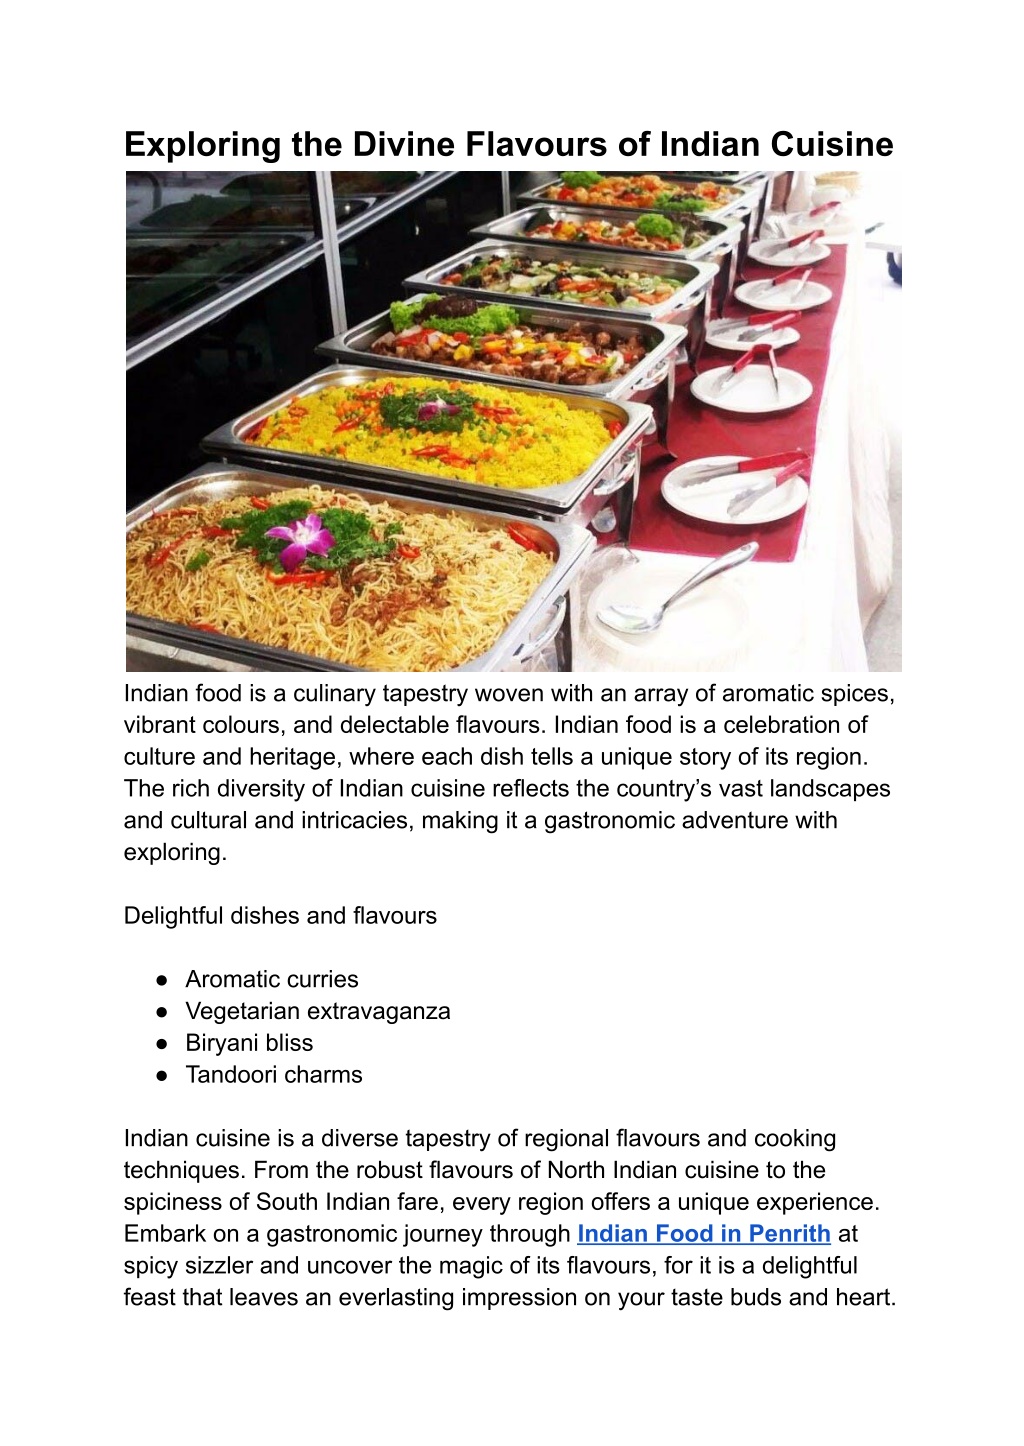 PPT - Exploring the Divine Flavours of Indian Cuisine PowerPoint